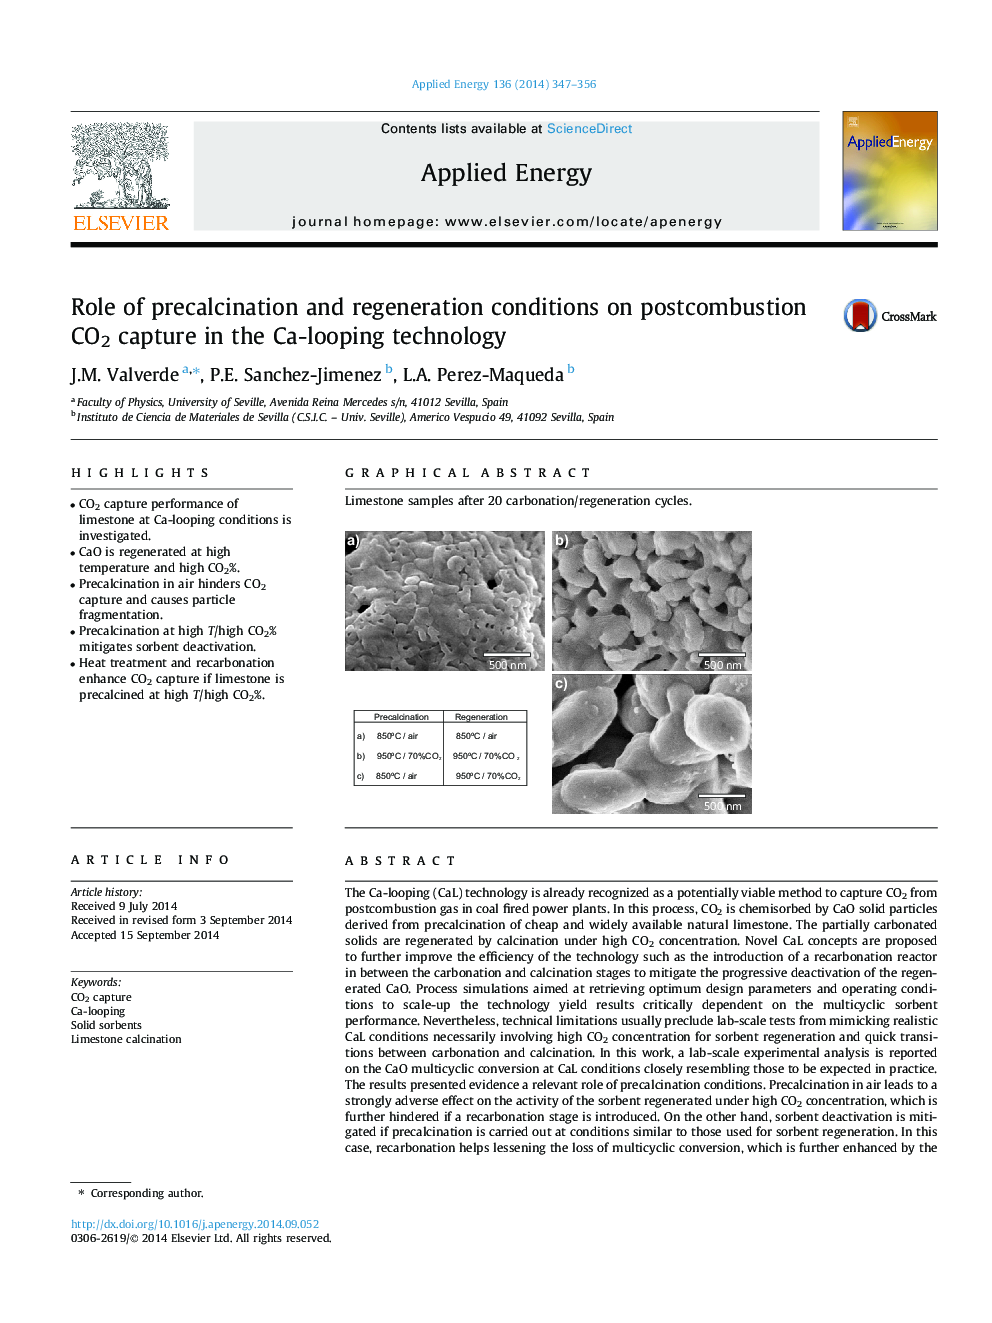 Role of precalcination and regeneration conditions on postcombustion CO2 capture in the Ca-looping technology